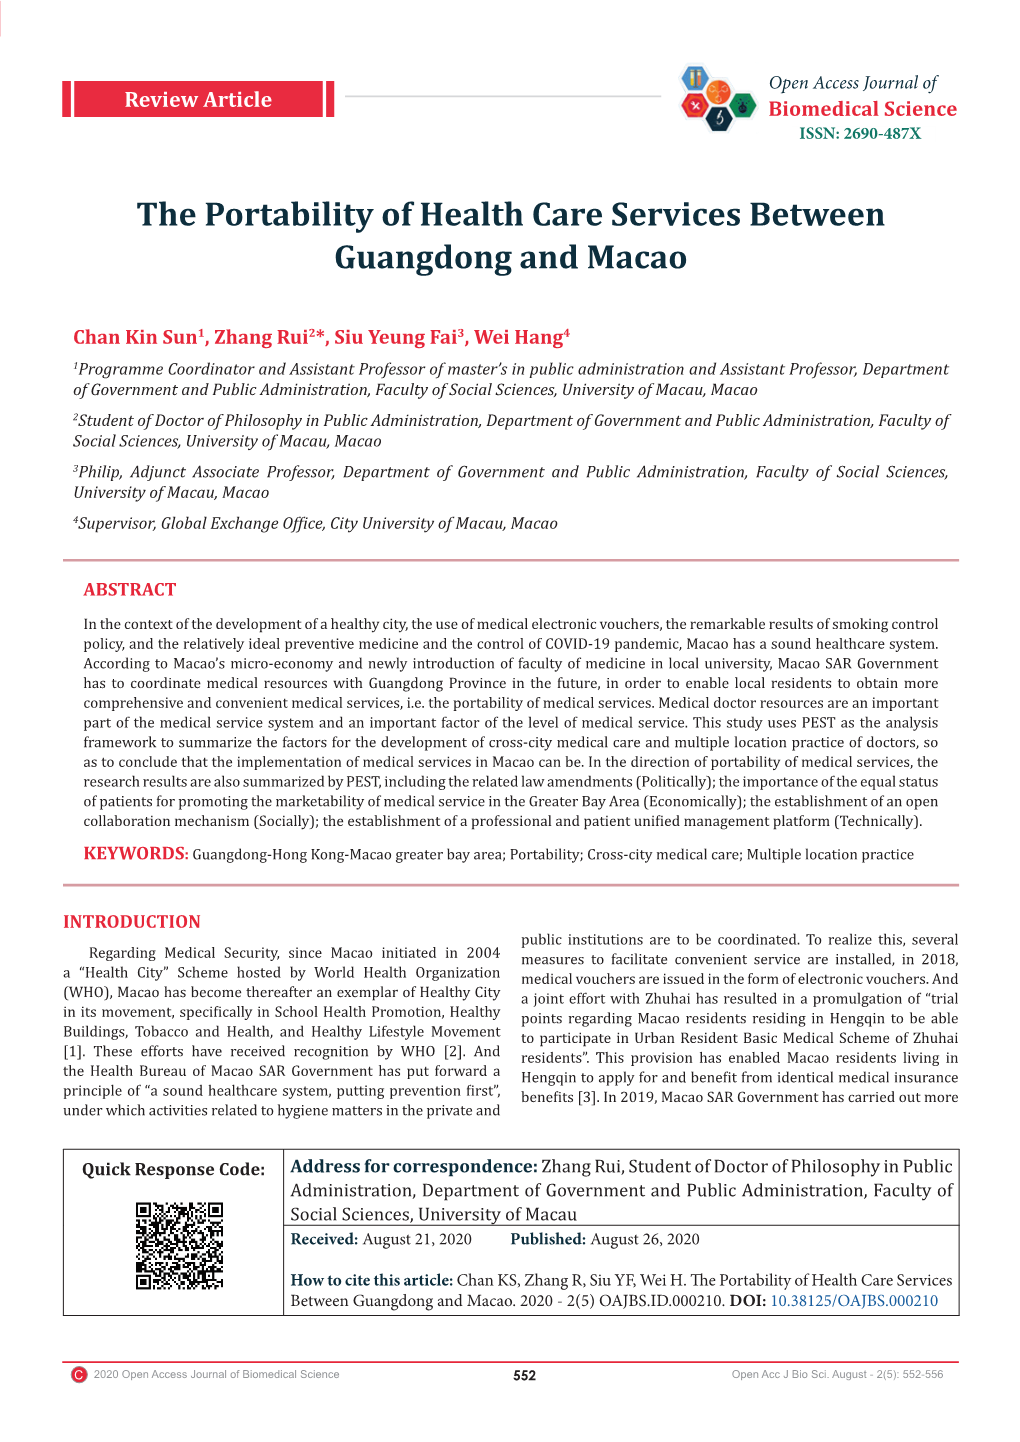 The Portability of Health Care Services Between Guangdong and Macao